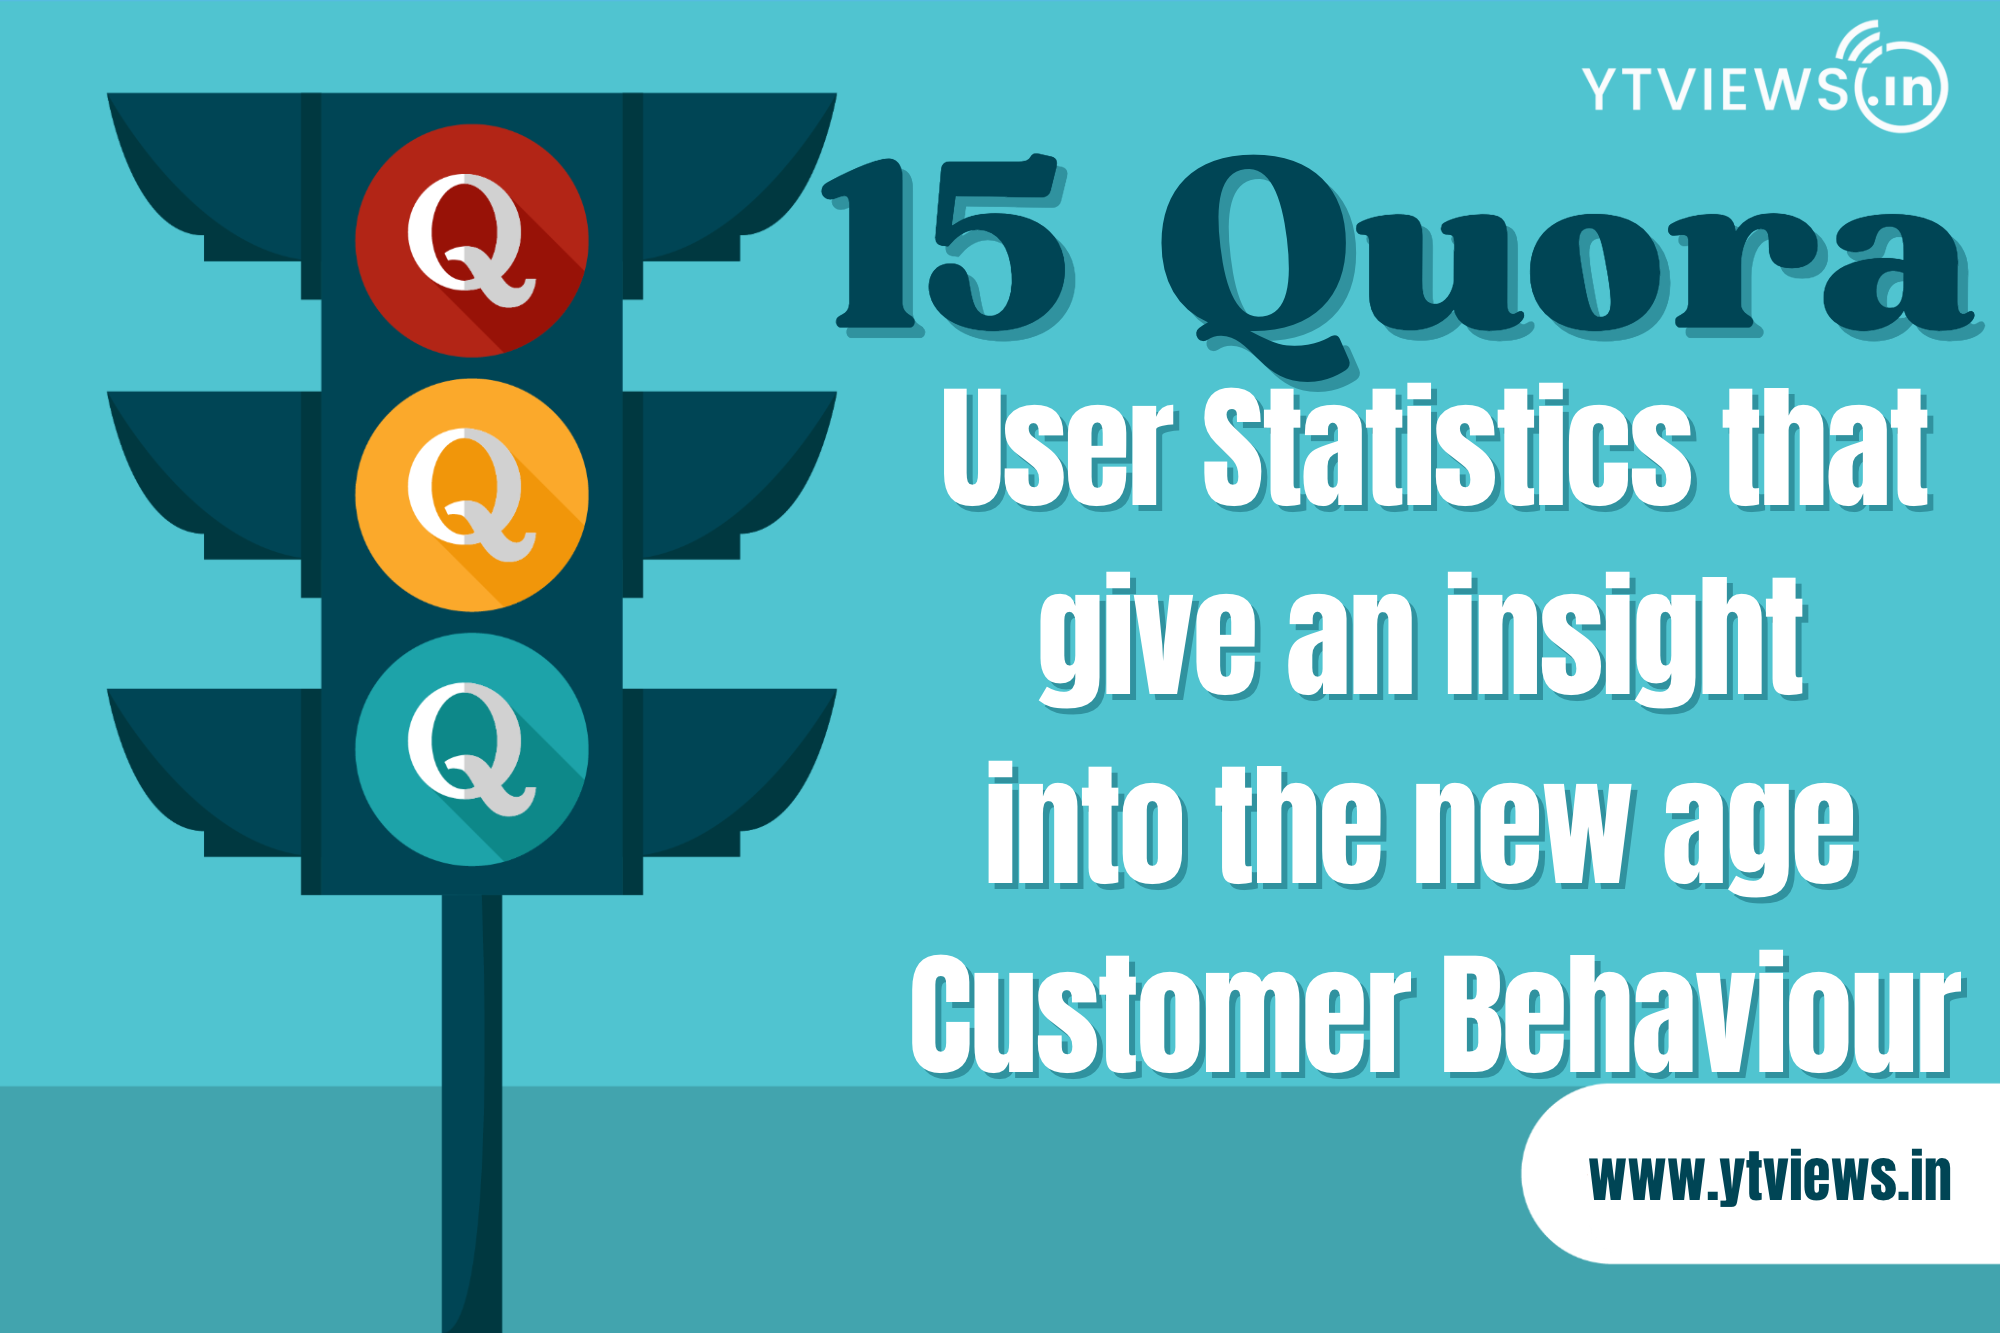 15 Quora user-statistics that give an insight into the new age customer behavior.